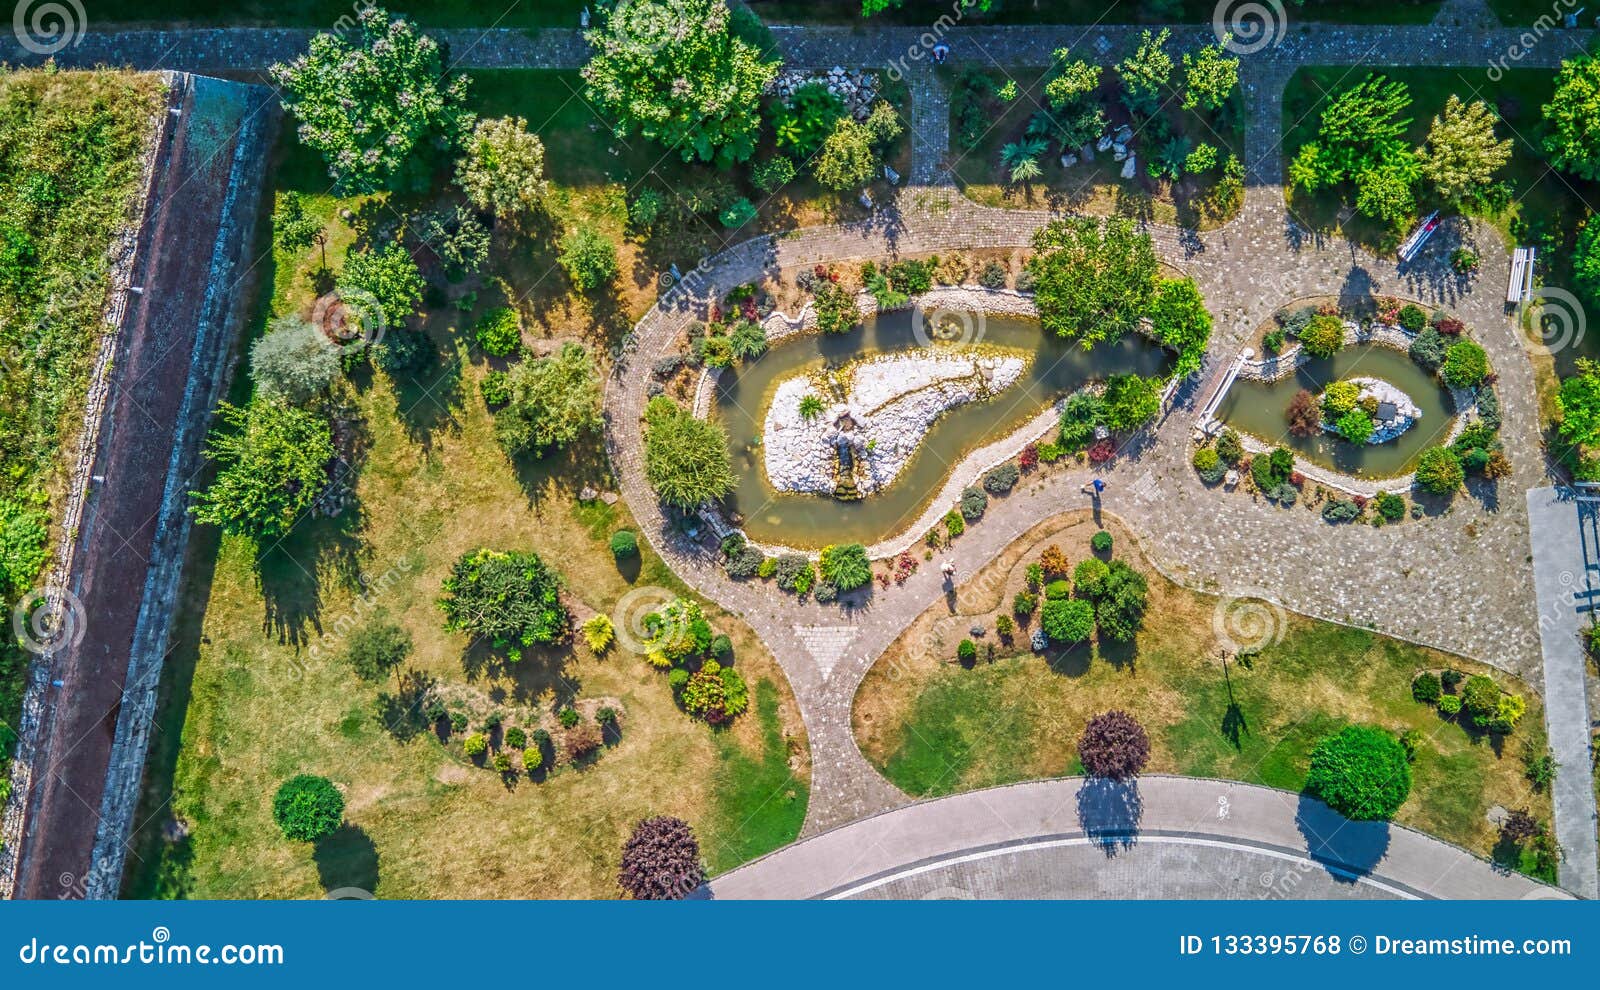 Amazing Aerial View Of A Japanese Garden Stock Photo Image Of Landscape Park 133395768